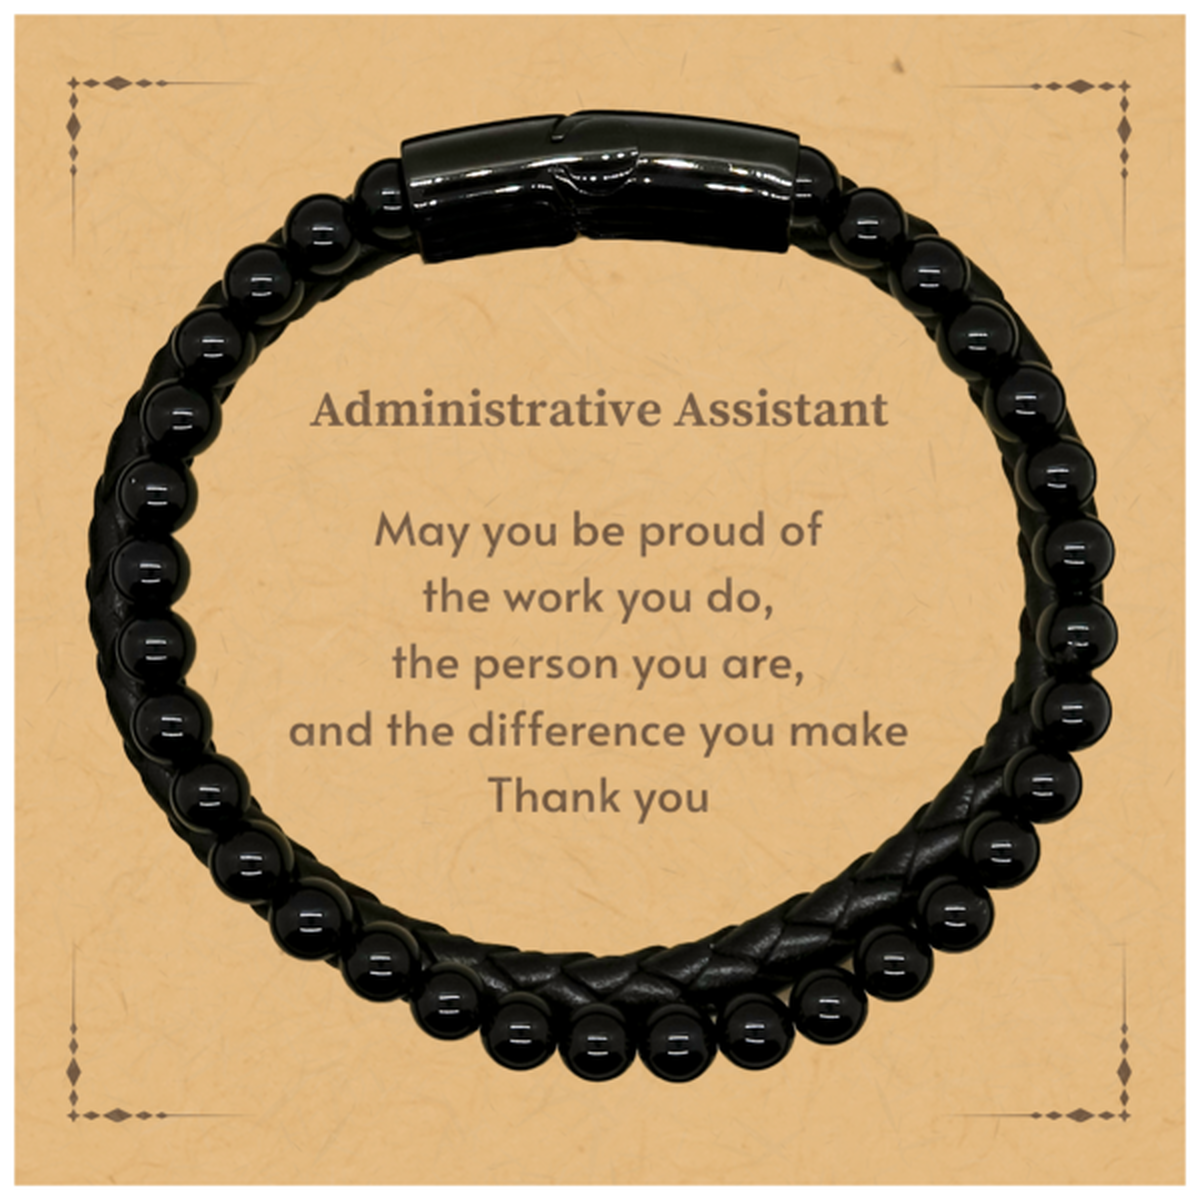 Heartwarming Stone Leather Bracelets Retirement Coworkers Gifts for Administrative Assistant, Administrative Assistant May You be proud of the work you do, the person you are Gifts for Boss Men Women Friends